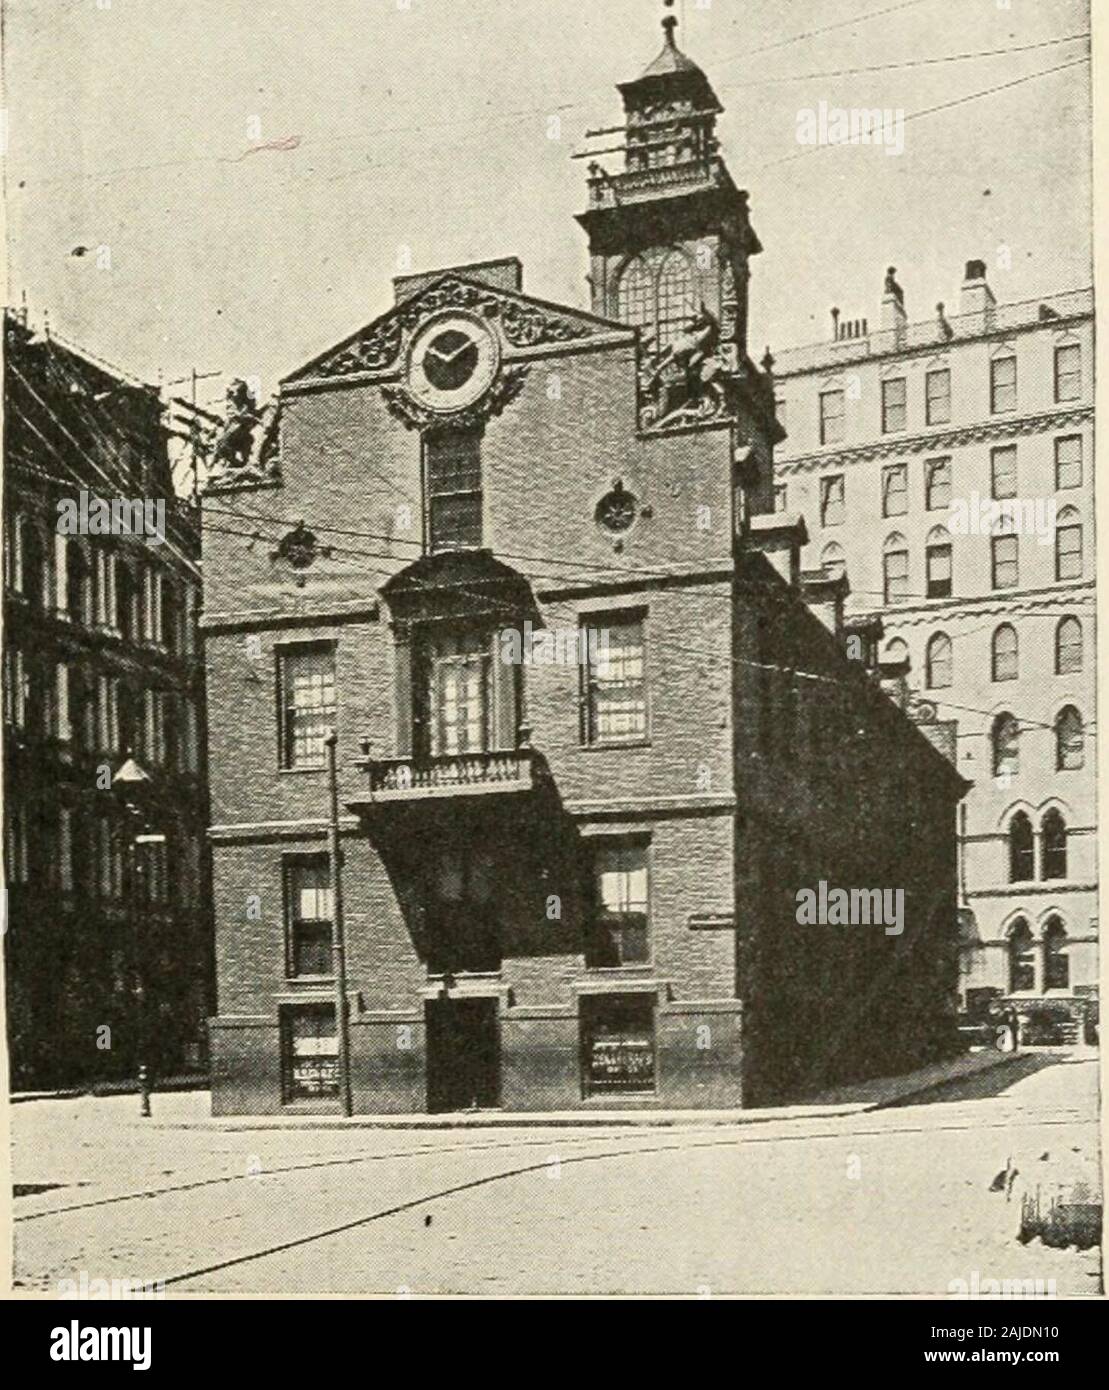 Beacon Hill History – Buildings of New England